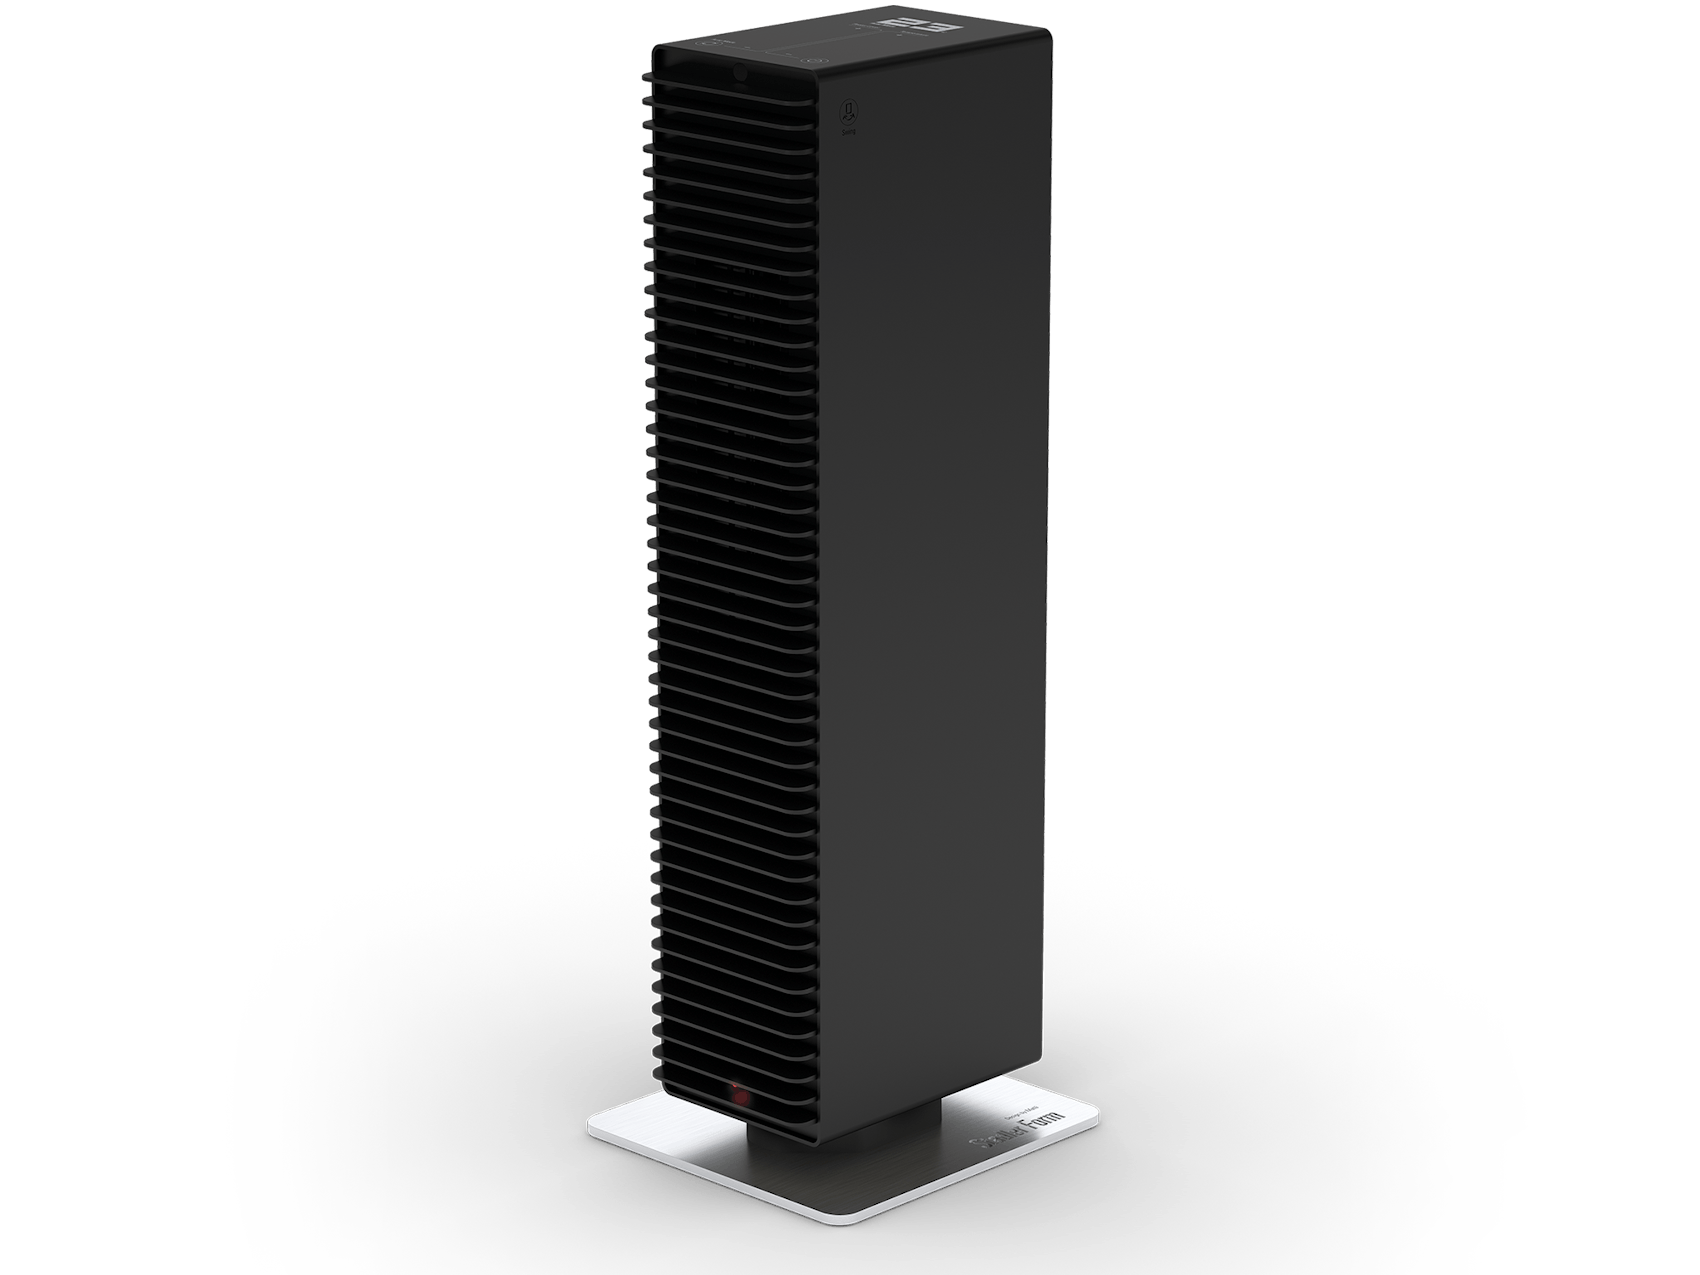 Paul heater by Stadler Form in black as perspective view